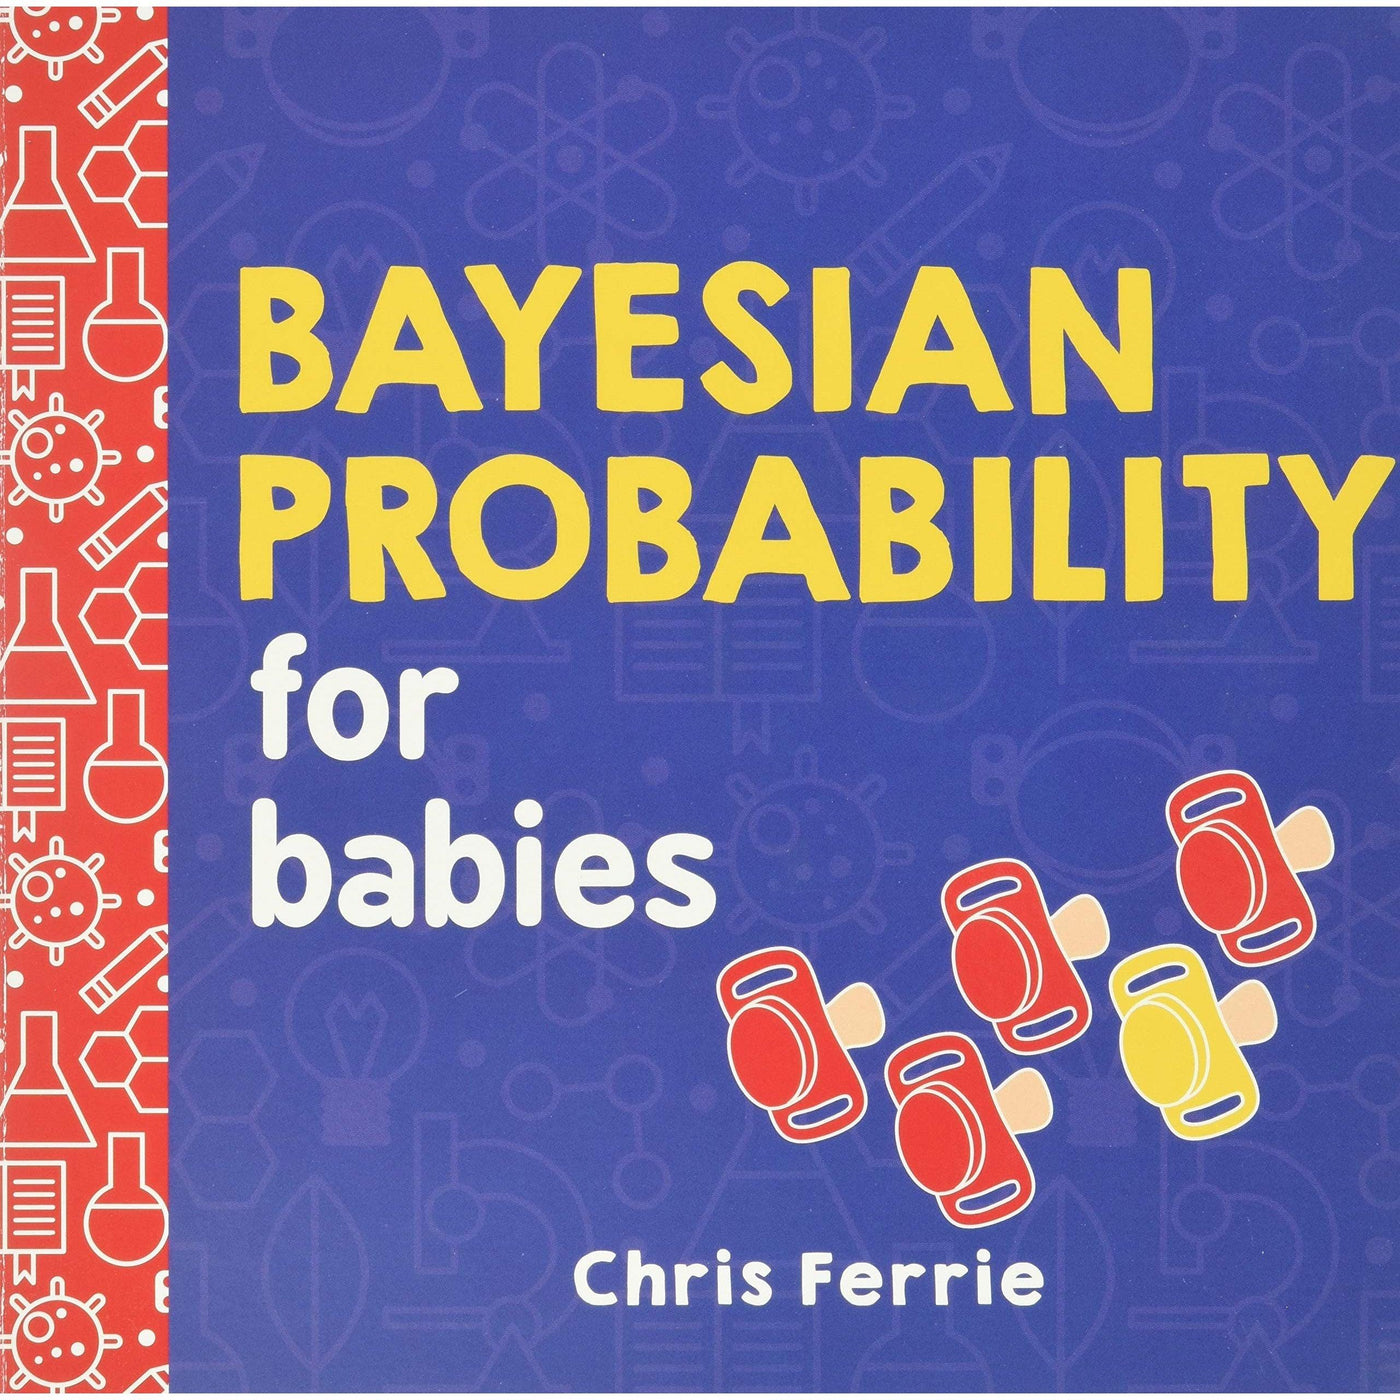 Bayesian Probability For Babies - Chris Ferrie